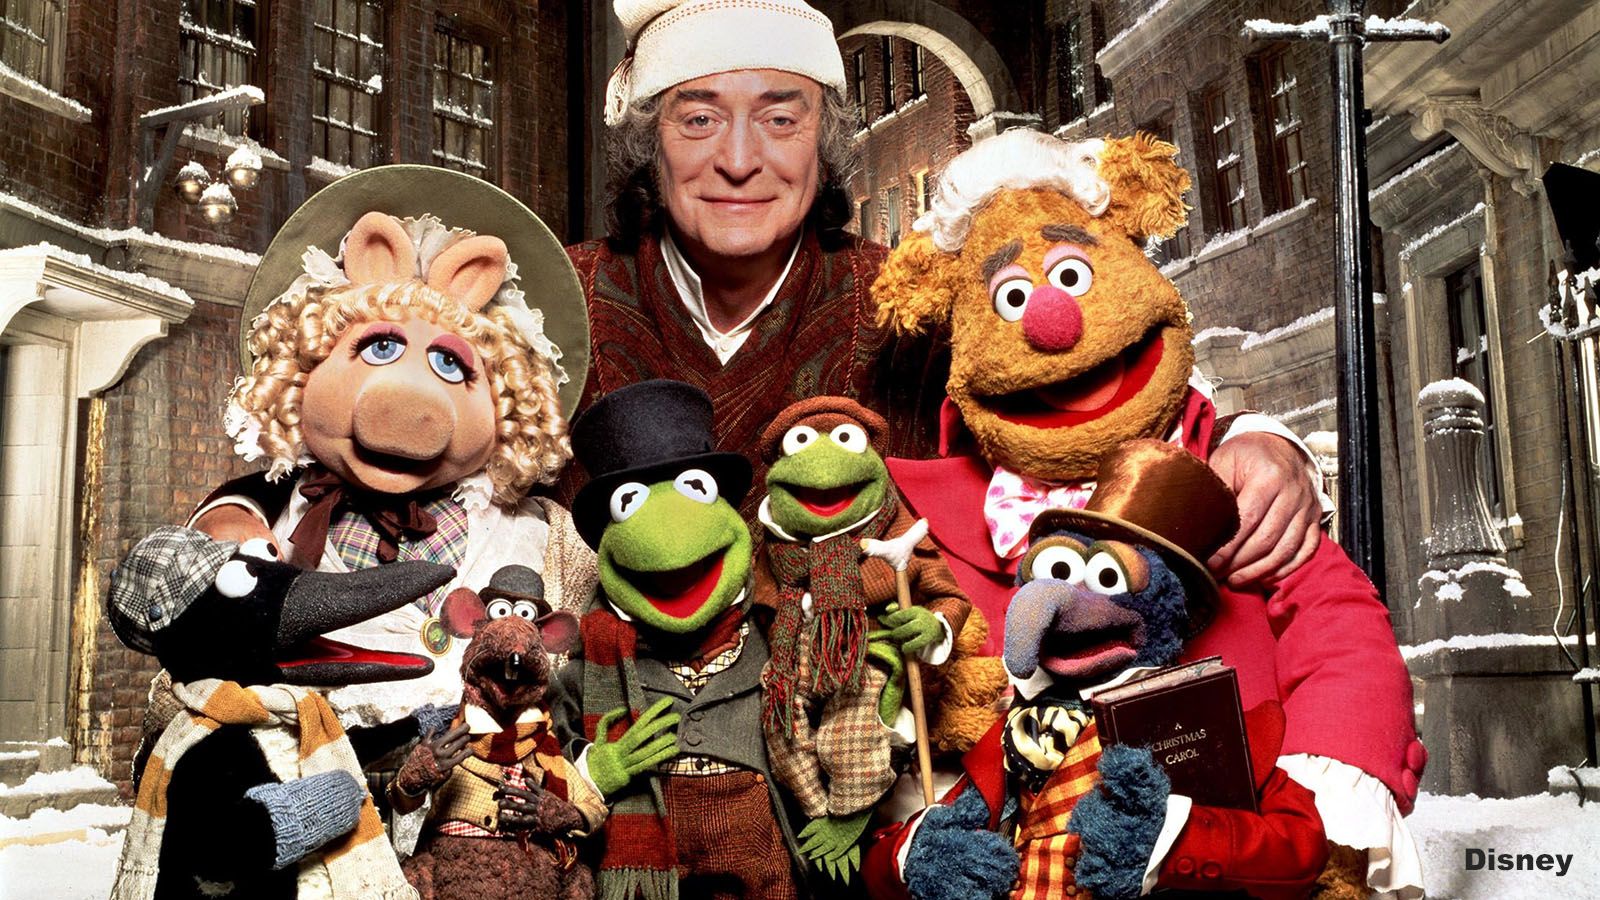 The Fort Wayne Philharmonic will supply the score during a screening of The Muppet Christmas Carol on Thursday, Nov. 16, at PFW’s Auer Performance Hall.